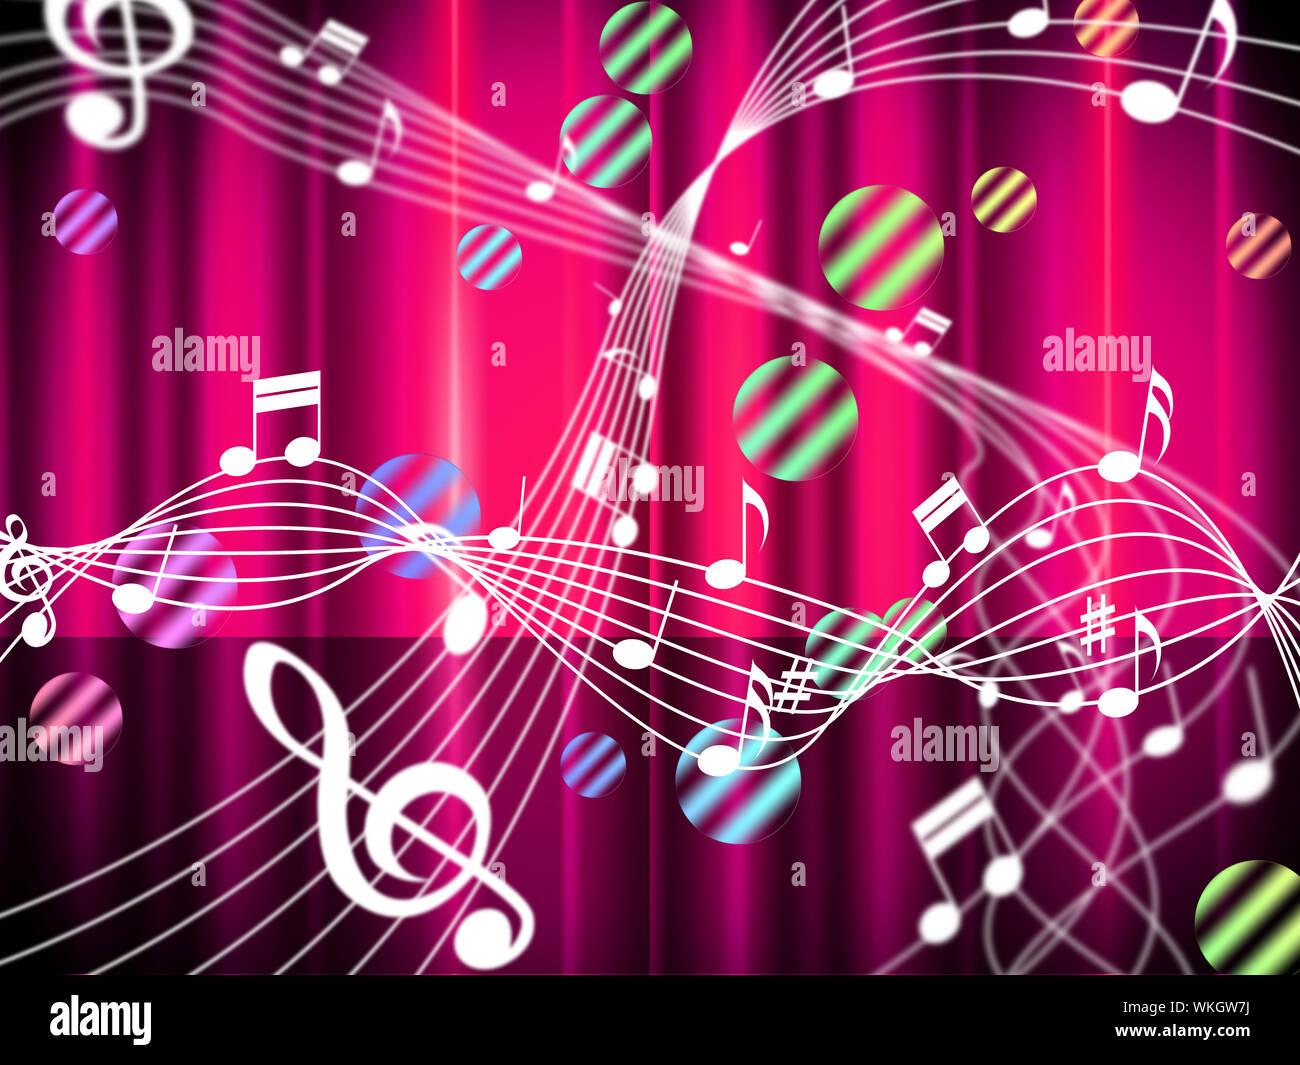 Background Stage Representing Sheet Music And Backdrop Stock Photo - Alamy